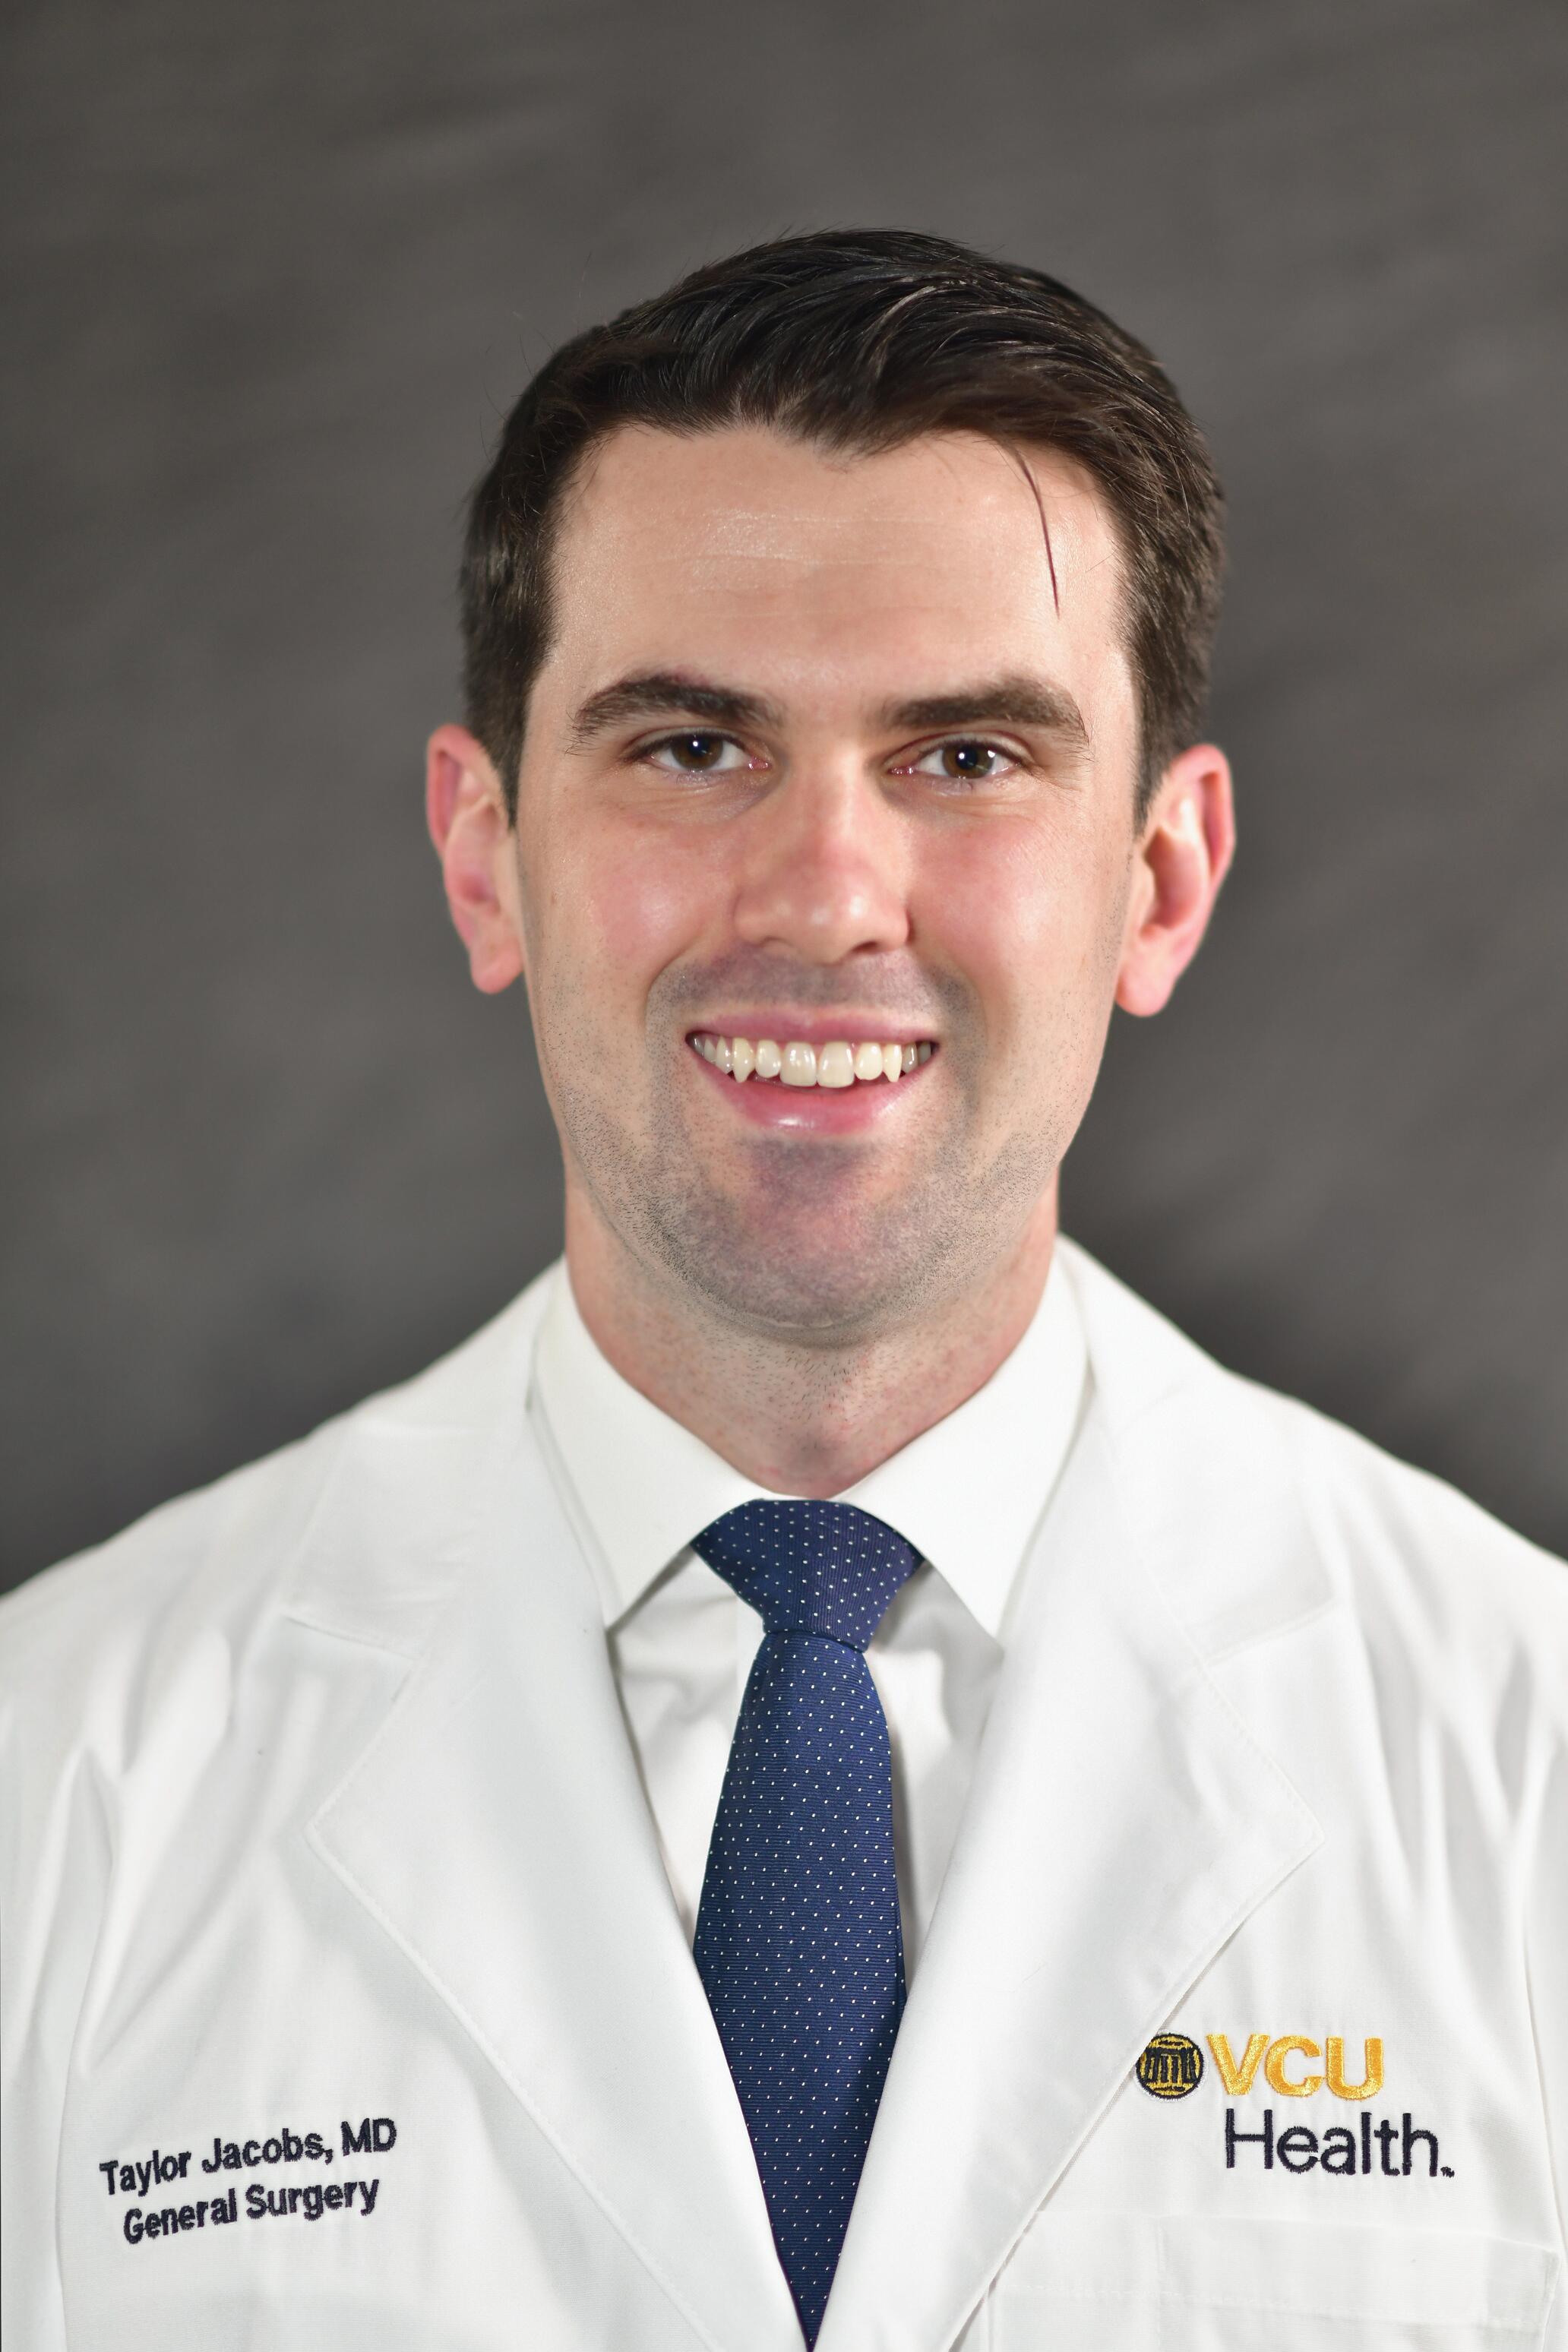 Taylor Jacobs, MD
